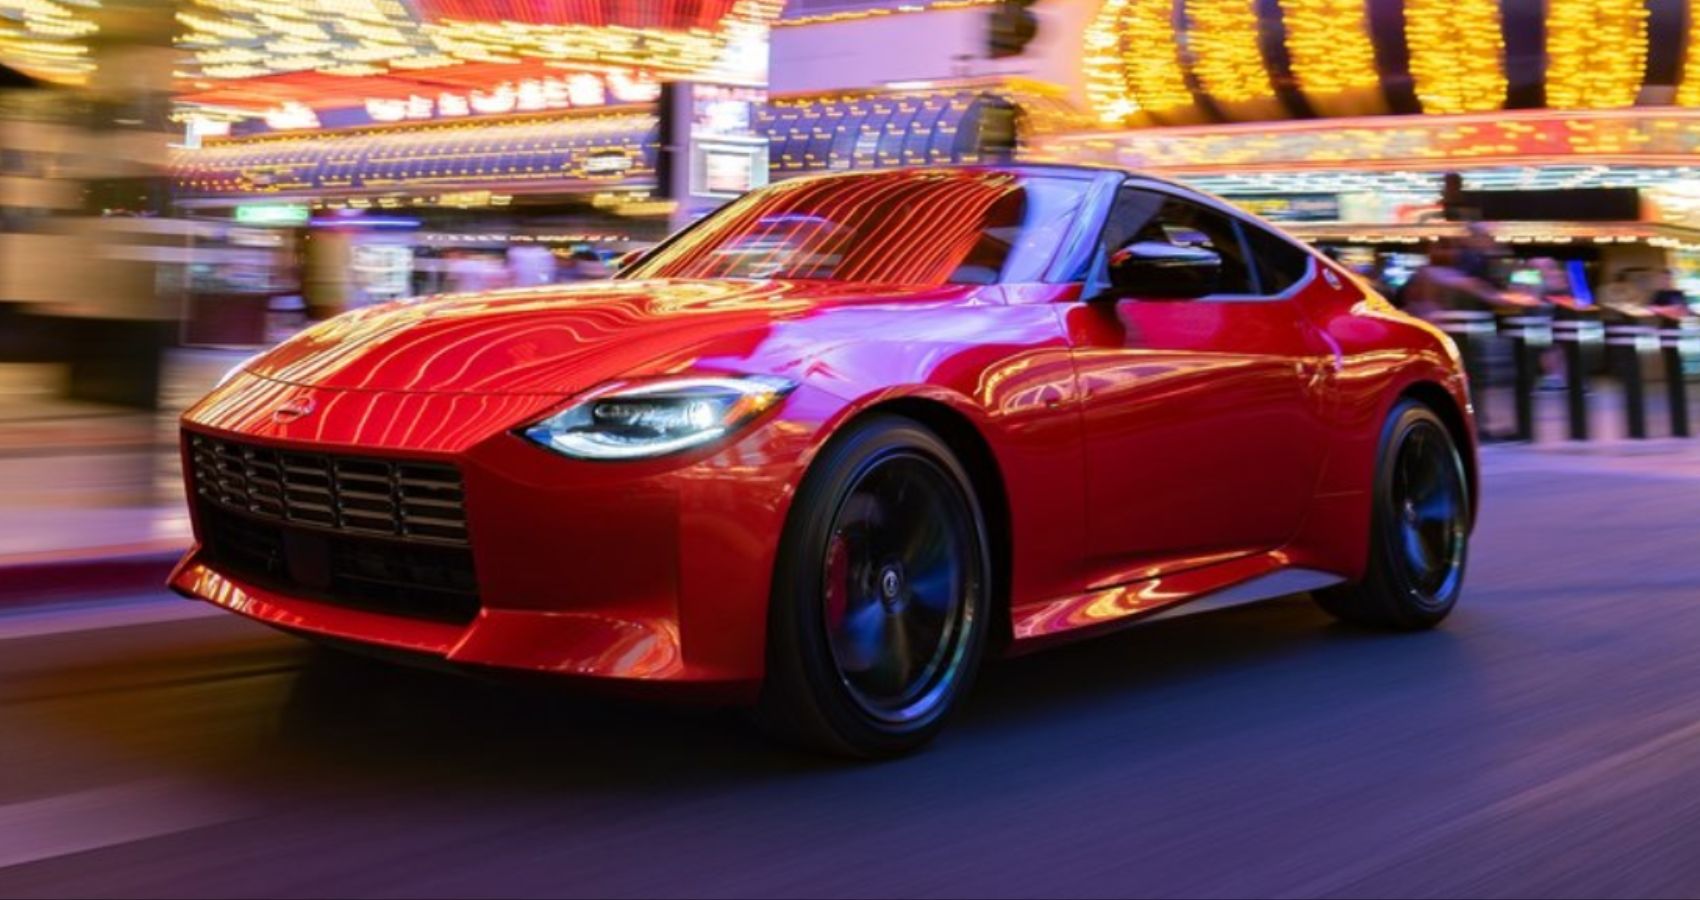 A 2023 Nissan Z Driving A Night In The Center Of A City In A Deep Red Color